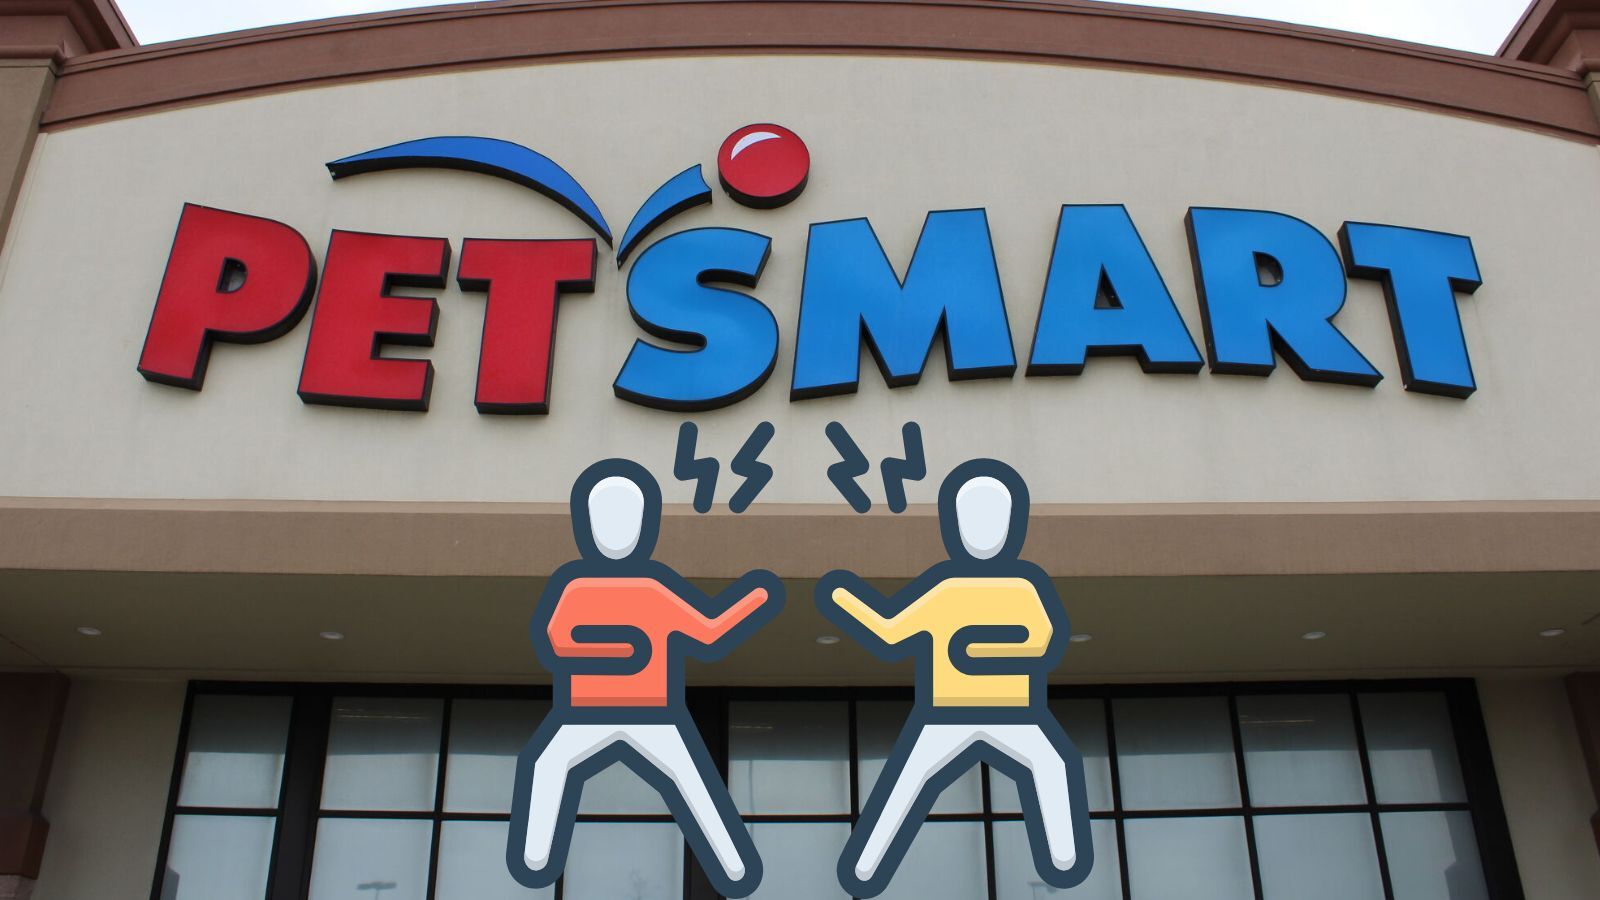 Top 11 PetSmart Competitors (Which Is the Biggest One?)